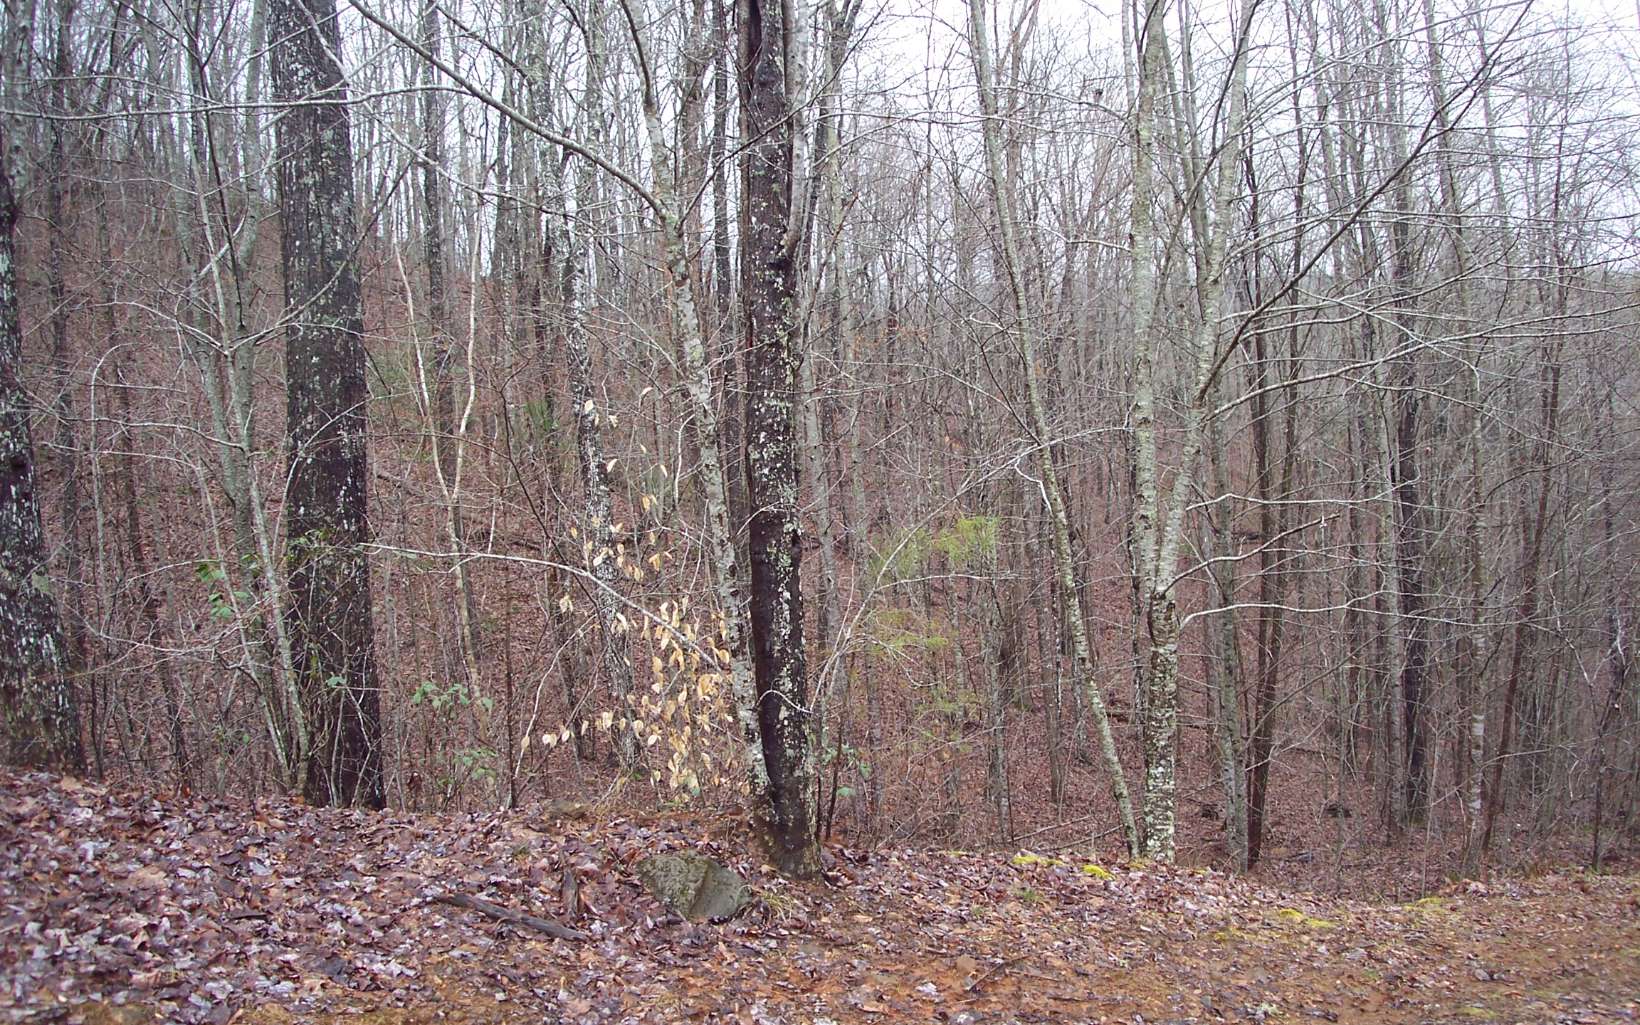 Wonderful deep wooded views from beautiful Lot 13A in Autumn Ridge Subdivision. This is a relatively small Subdivision with minimal covenants & restrictions designed to protect your investment, and not be a hassle for the owner. Nicely laying land with great building sites. All paved roads for easy access. Privacy and quiet, yet within 5 miles to either Hayesville, North Carolina or Hiawassee, Georgia. Additional contiguous acreage with great mountain & Lake Chatuge views is available to provide an even greater private retreat for your mountain cabin/home. See Lots #11A and #17 @ $19,500 each MLS 315921 and 315923.